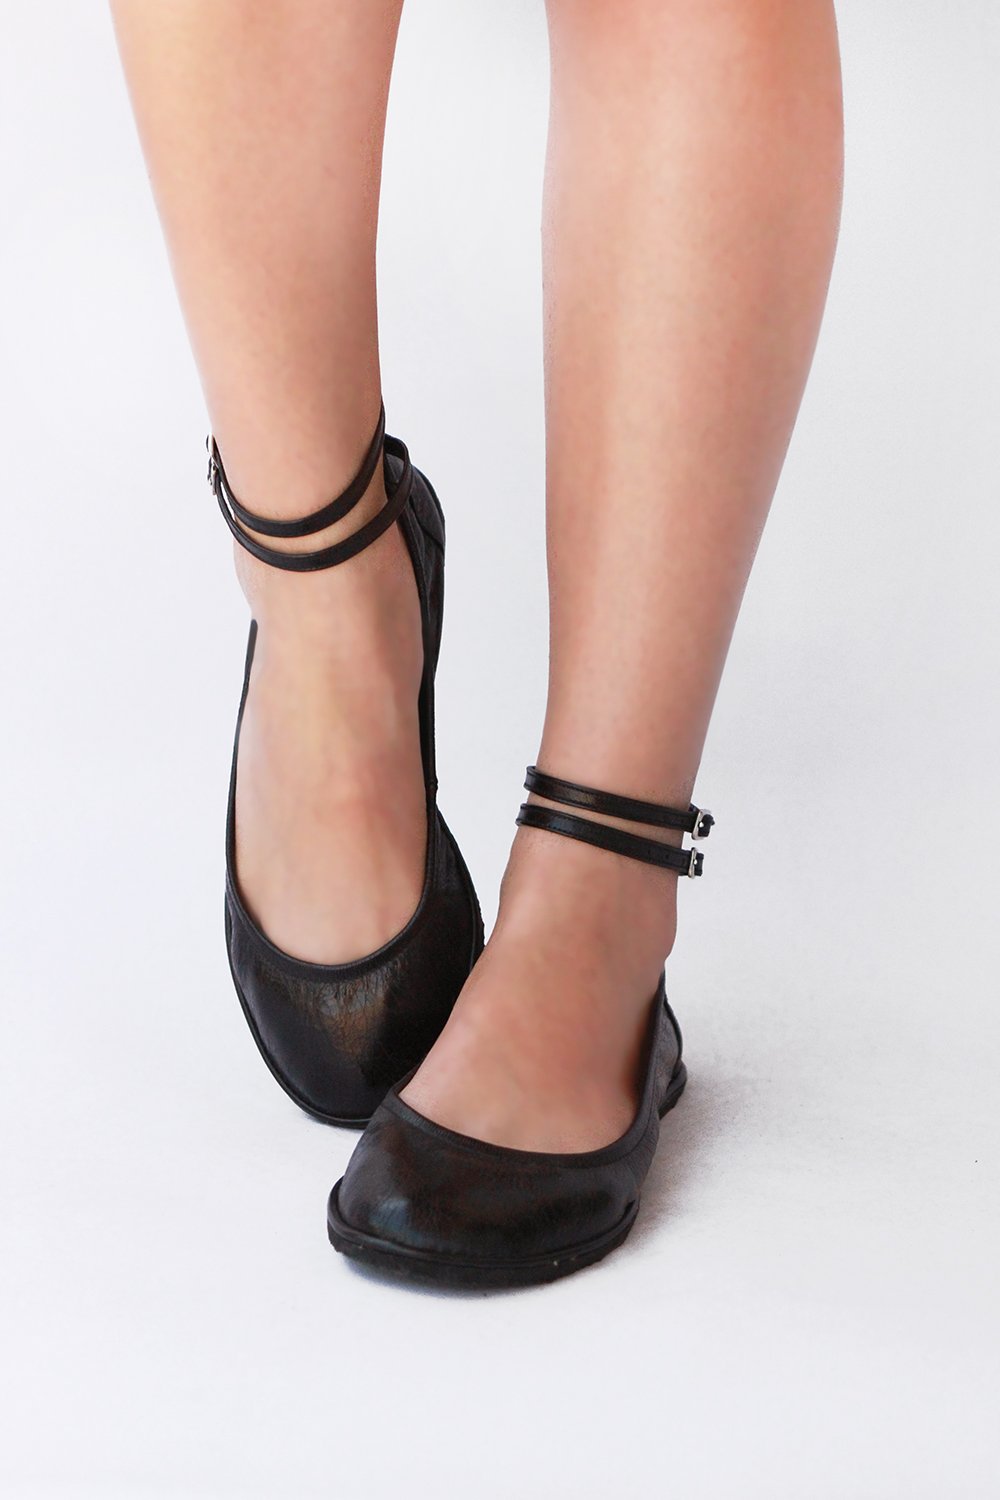 Synslinie katastrofale Vejrudsigt Ballet flats - Two ankle straps | The Drifter Leather handmade shoes